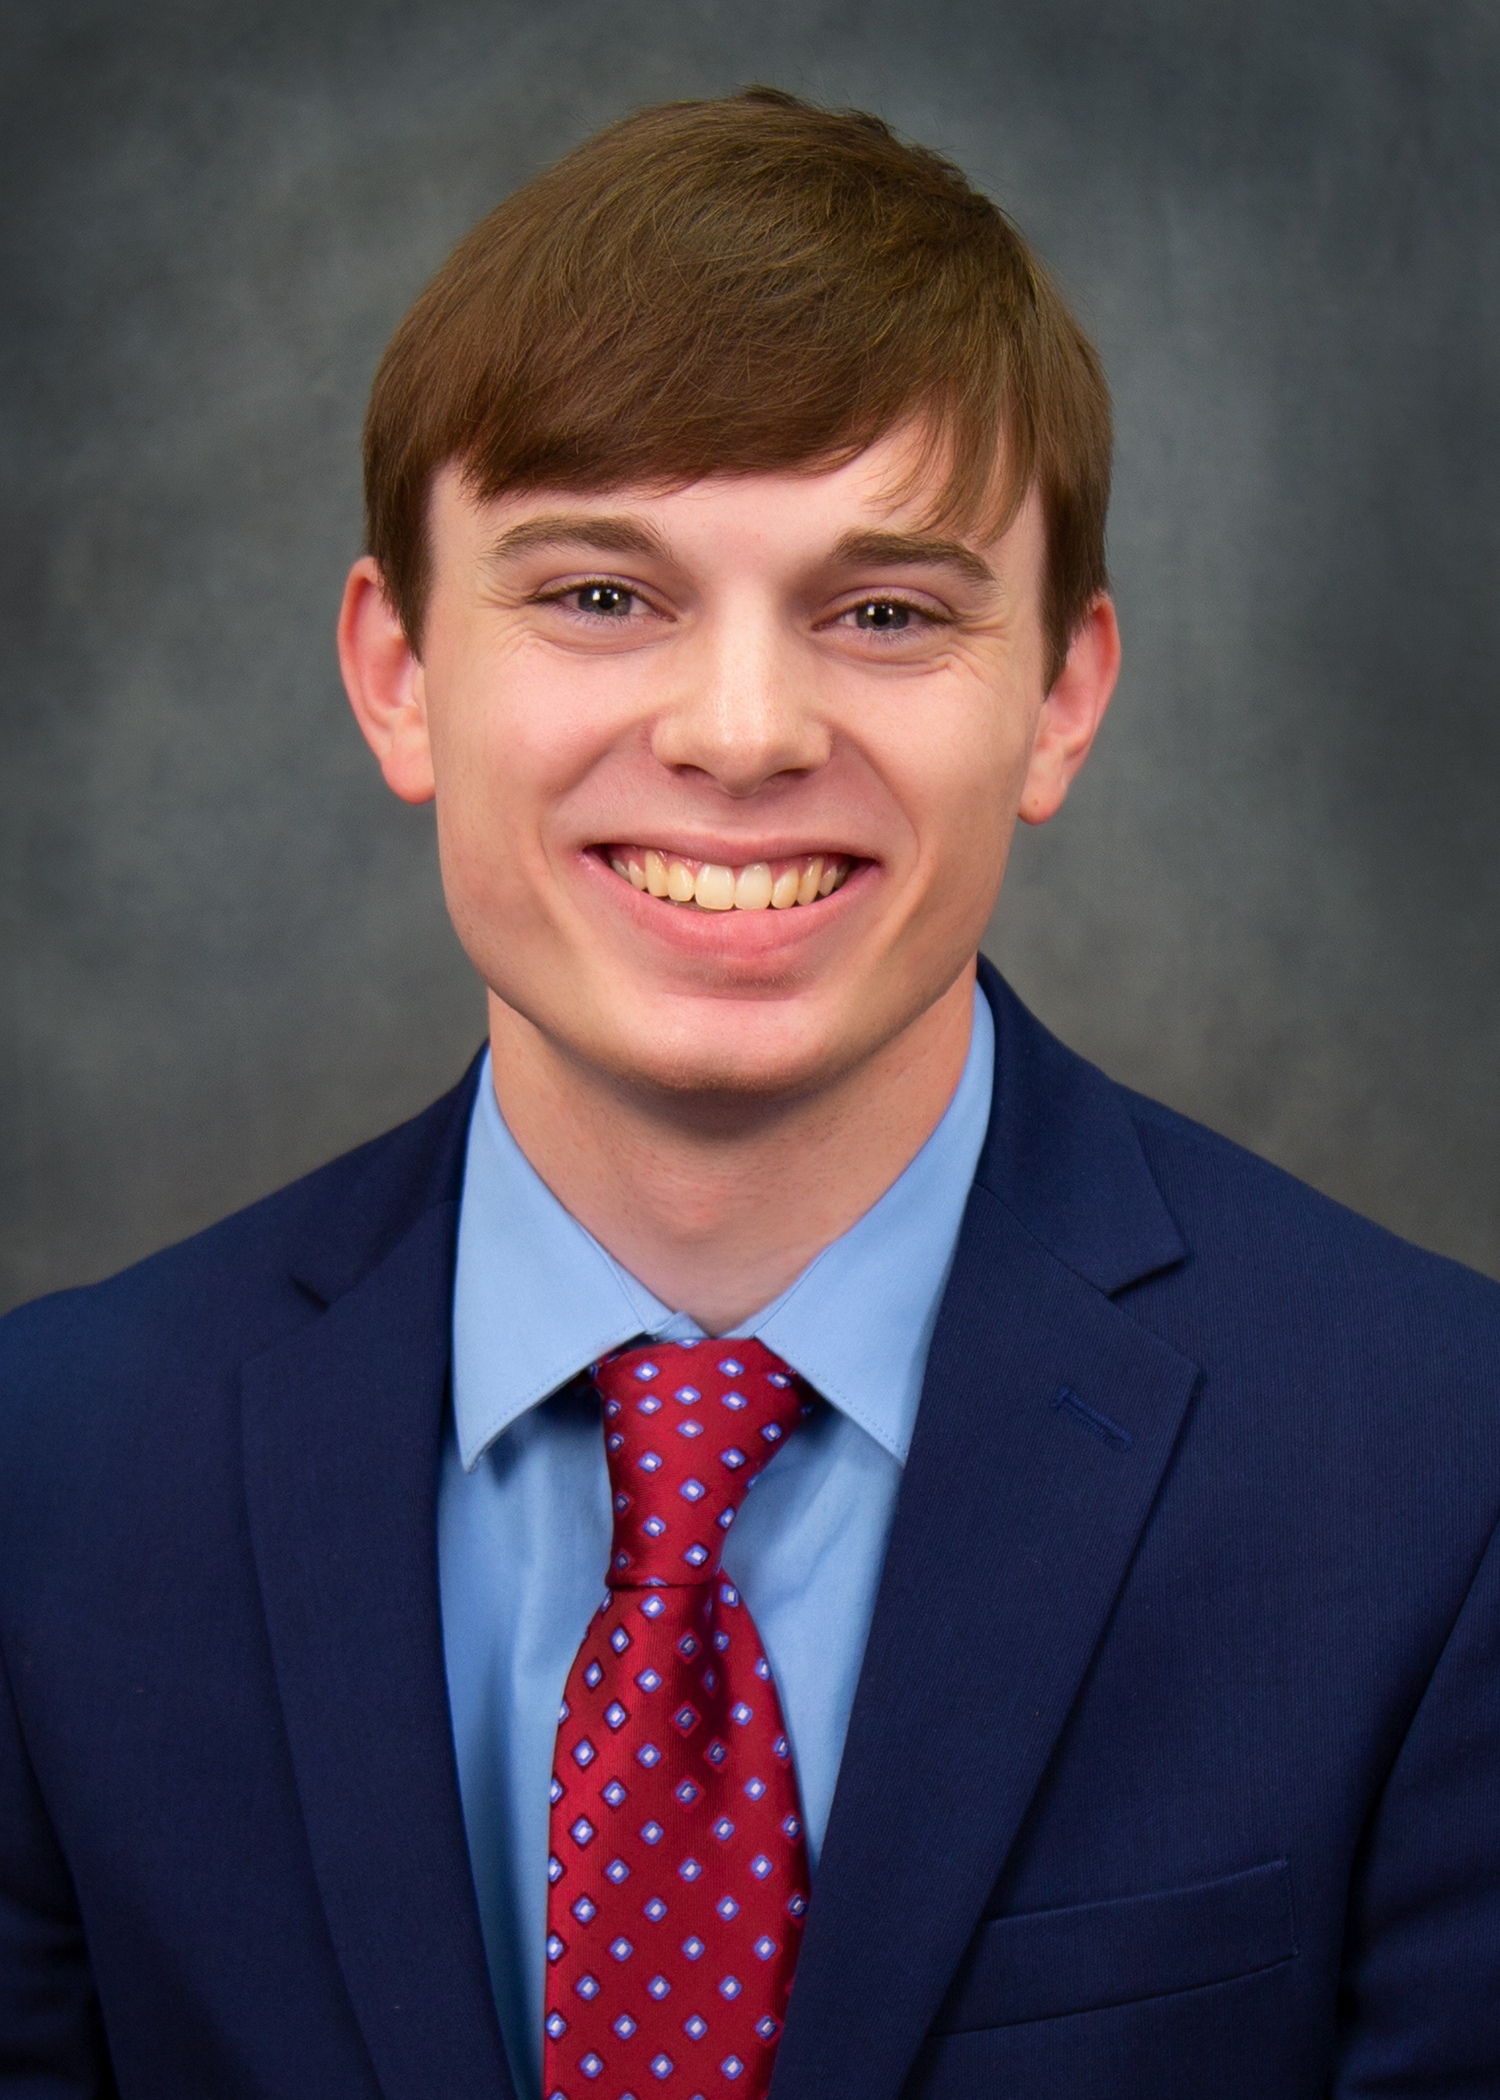 PhD Student, Jack Francis won the Hall of Fame Award for the College of Engineering.